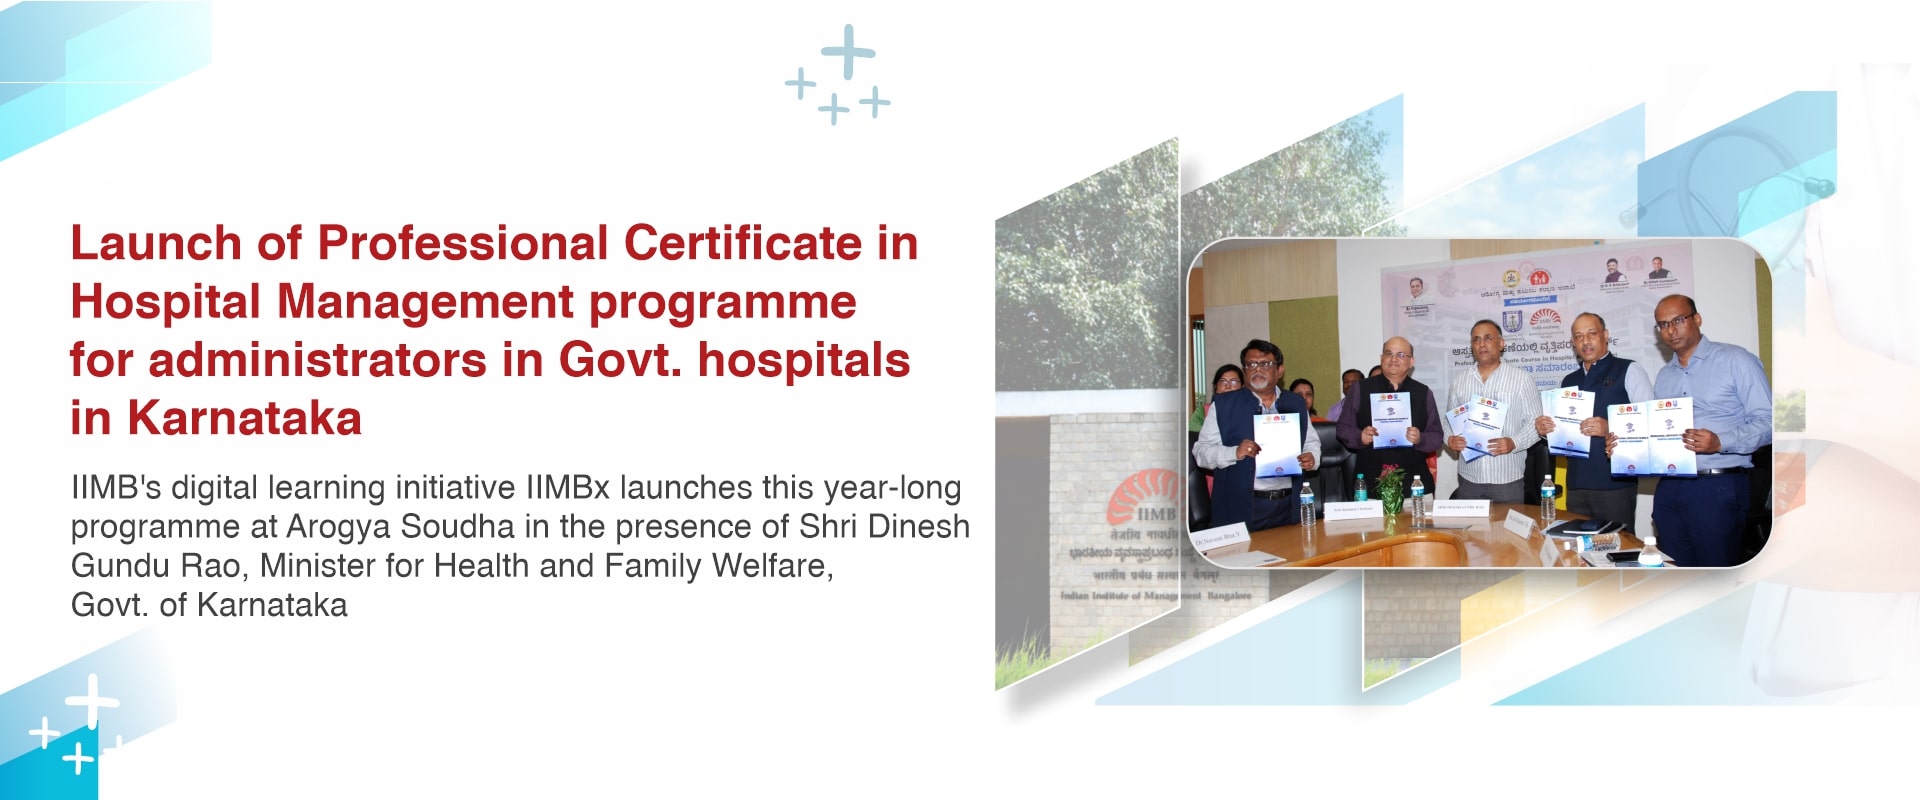 Launch of Professional Certificate in Hospital Management programme for administrators in Govt. hospitals in Karnataka 